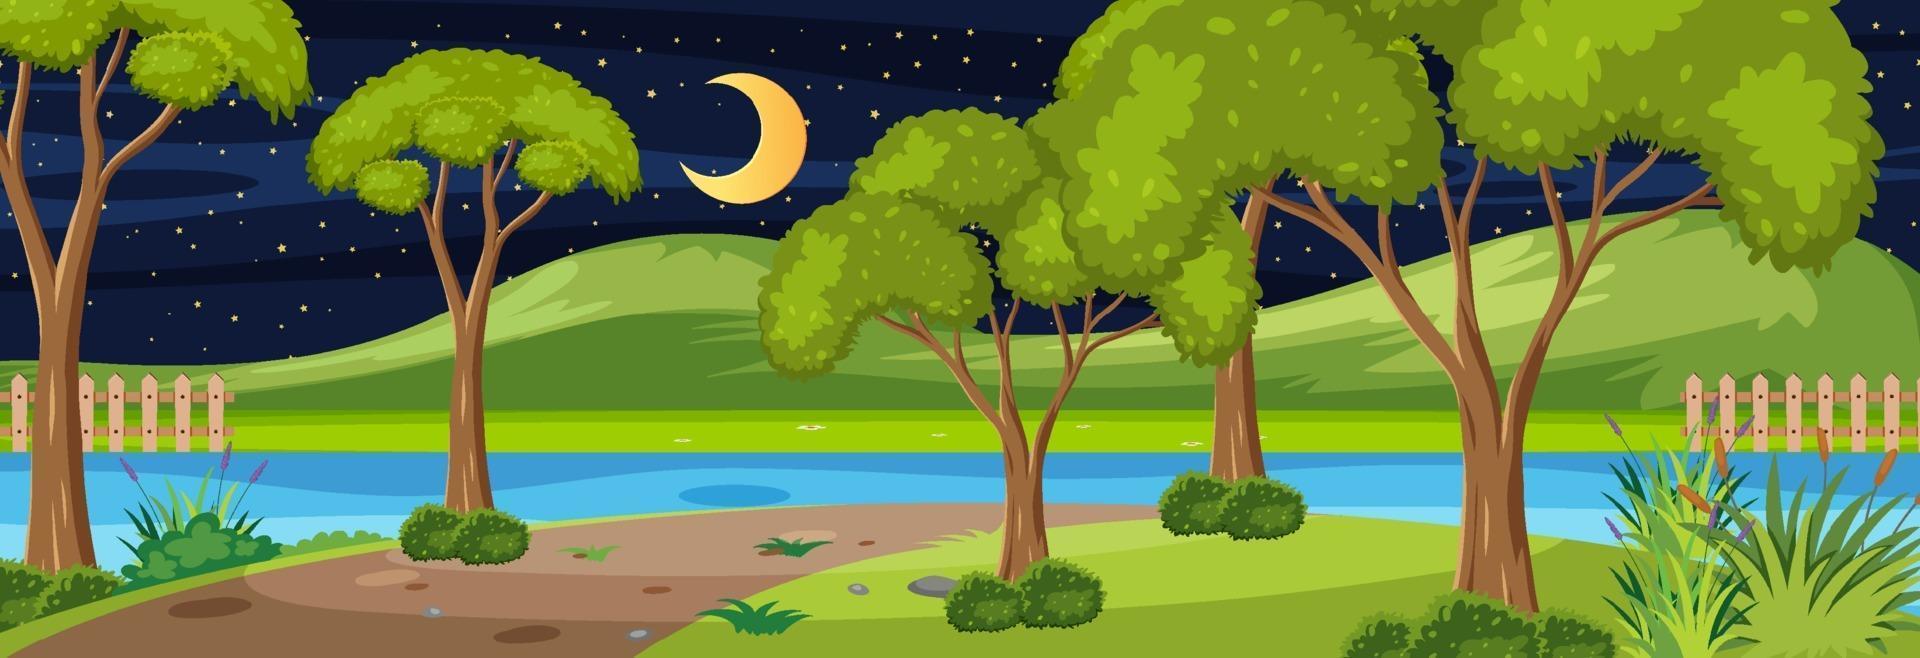 Forest along the river horizontal scene at night with many trees vector